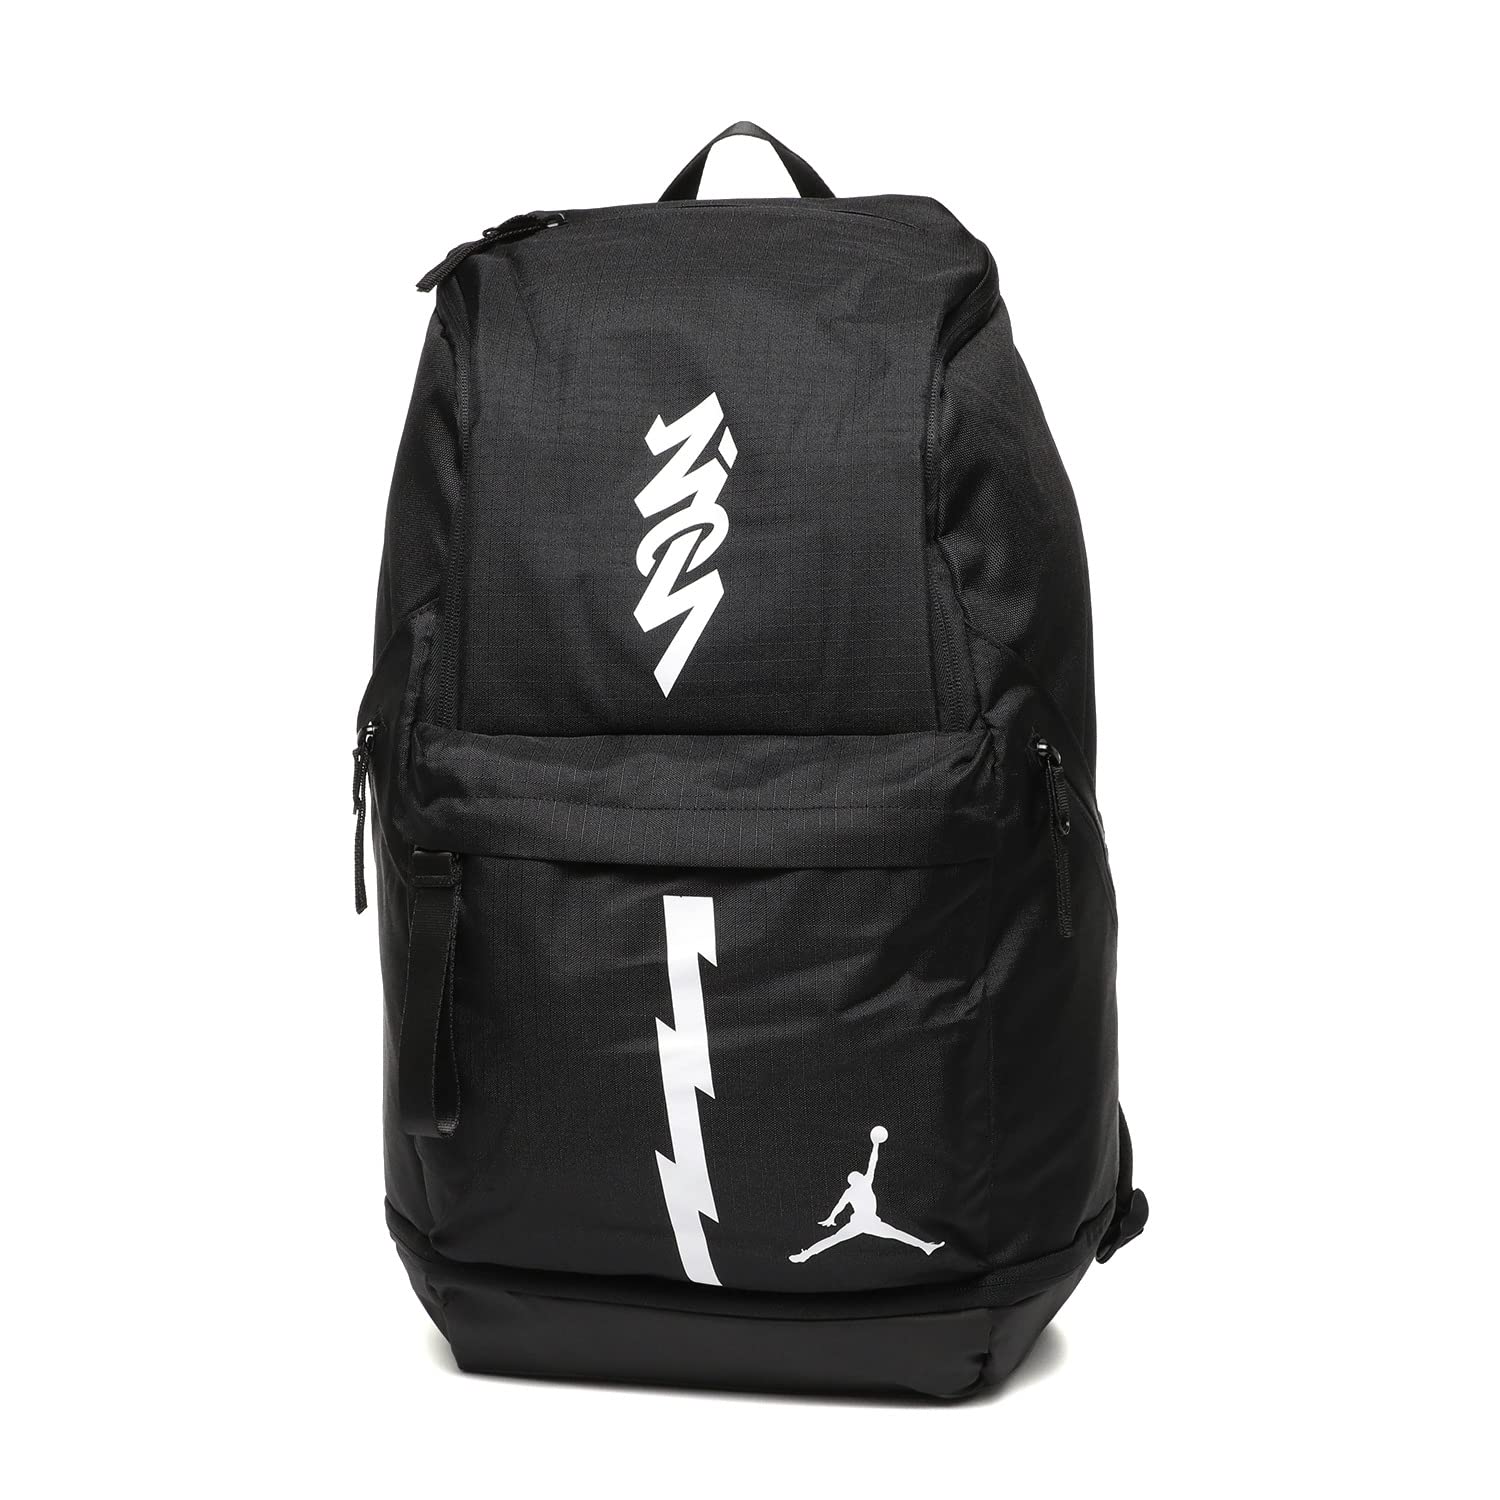 Image 3 of Zion Velocity Backpack (Big Kid)